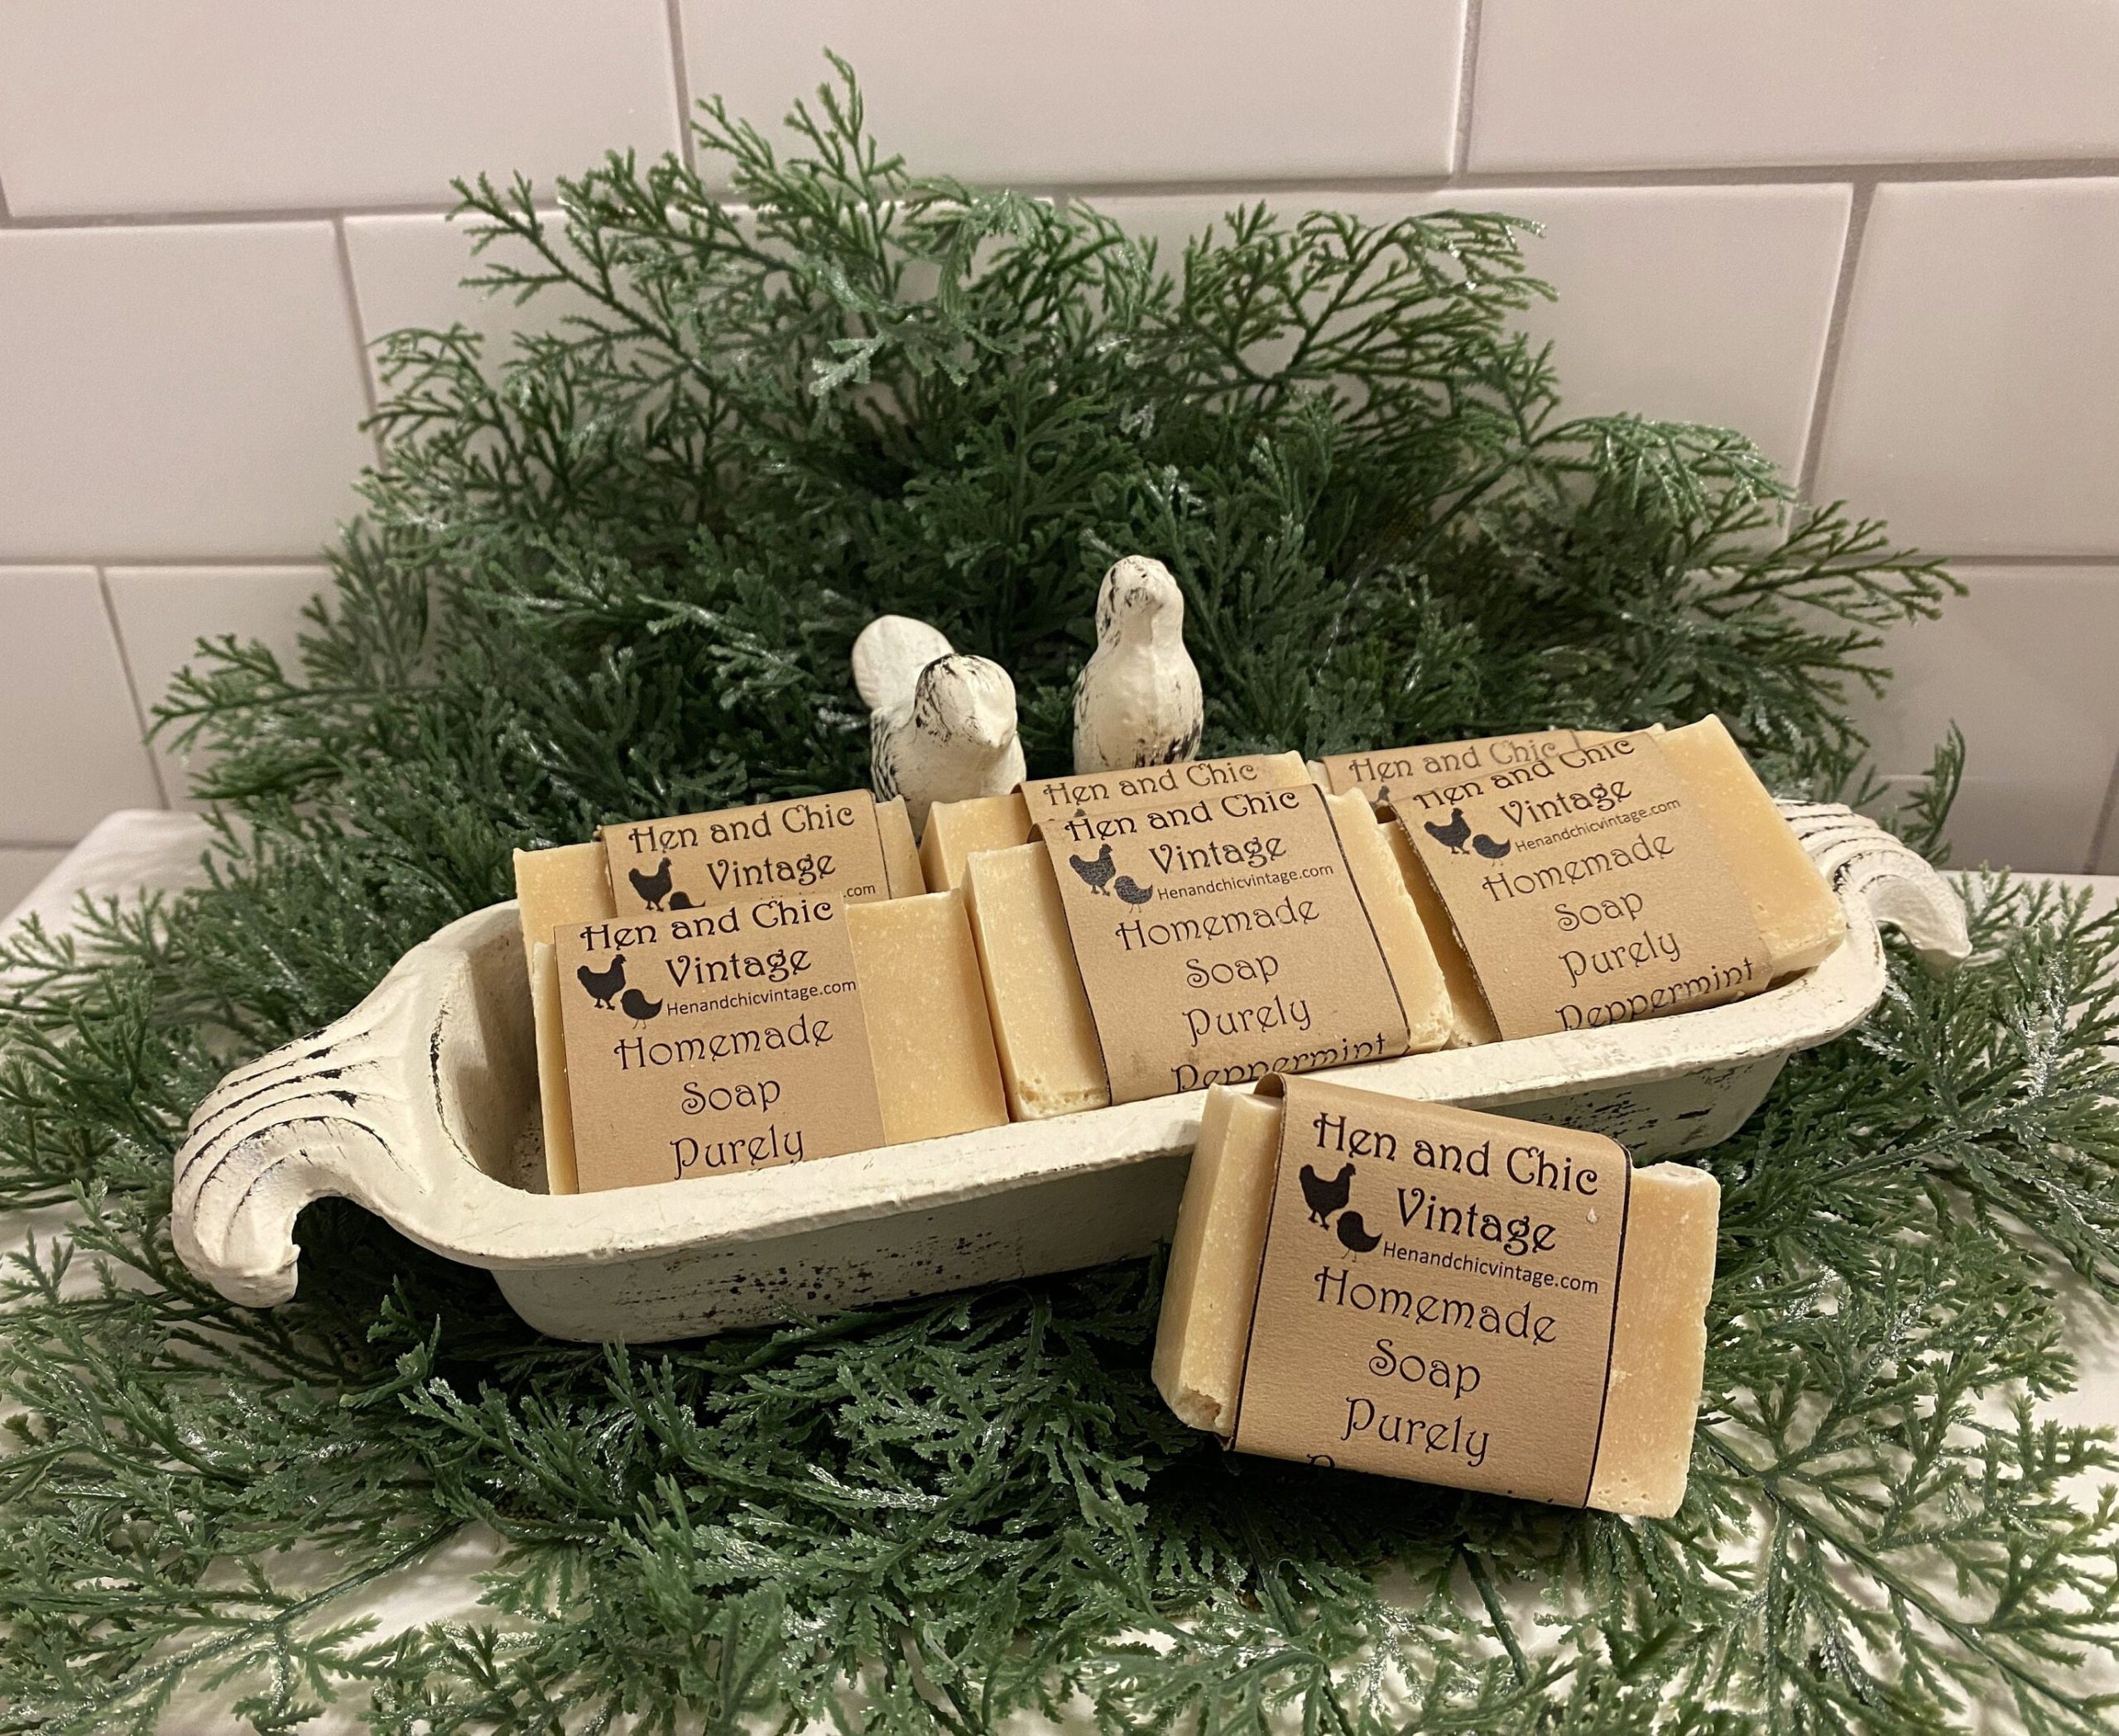 Homemade Soap – Pure Olive Oil – Made with organic ingredients. No  Artificial Colors Dyes. Cold Process. Hand, Body, Treat Yourself – Hen and  Chic Vintage